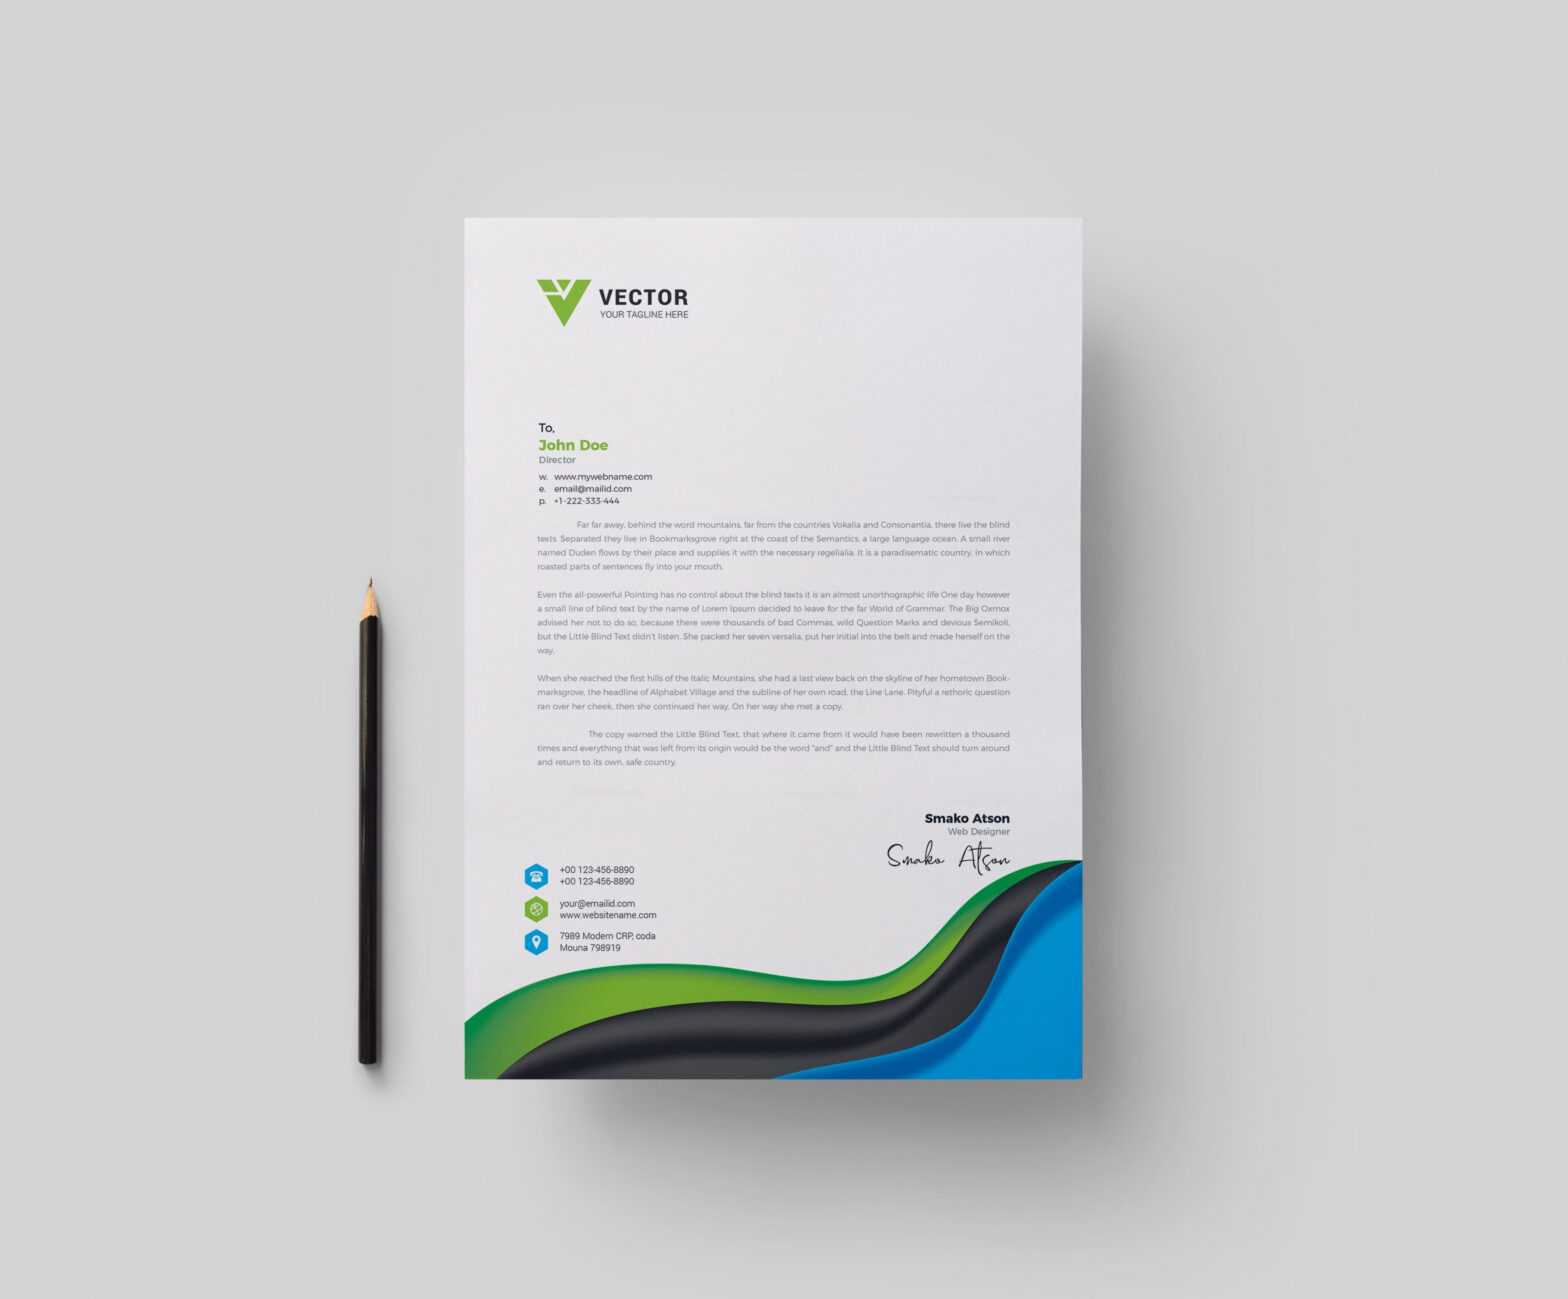 Medical Letterhead Design Template throughout Free Medical Letterhead Template